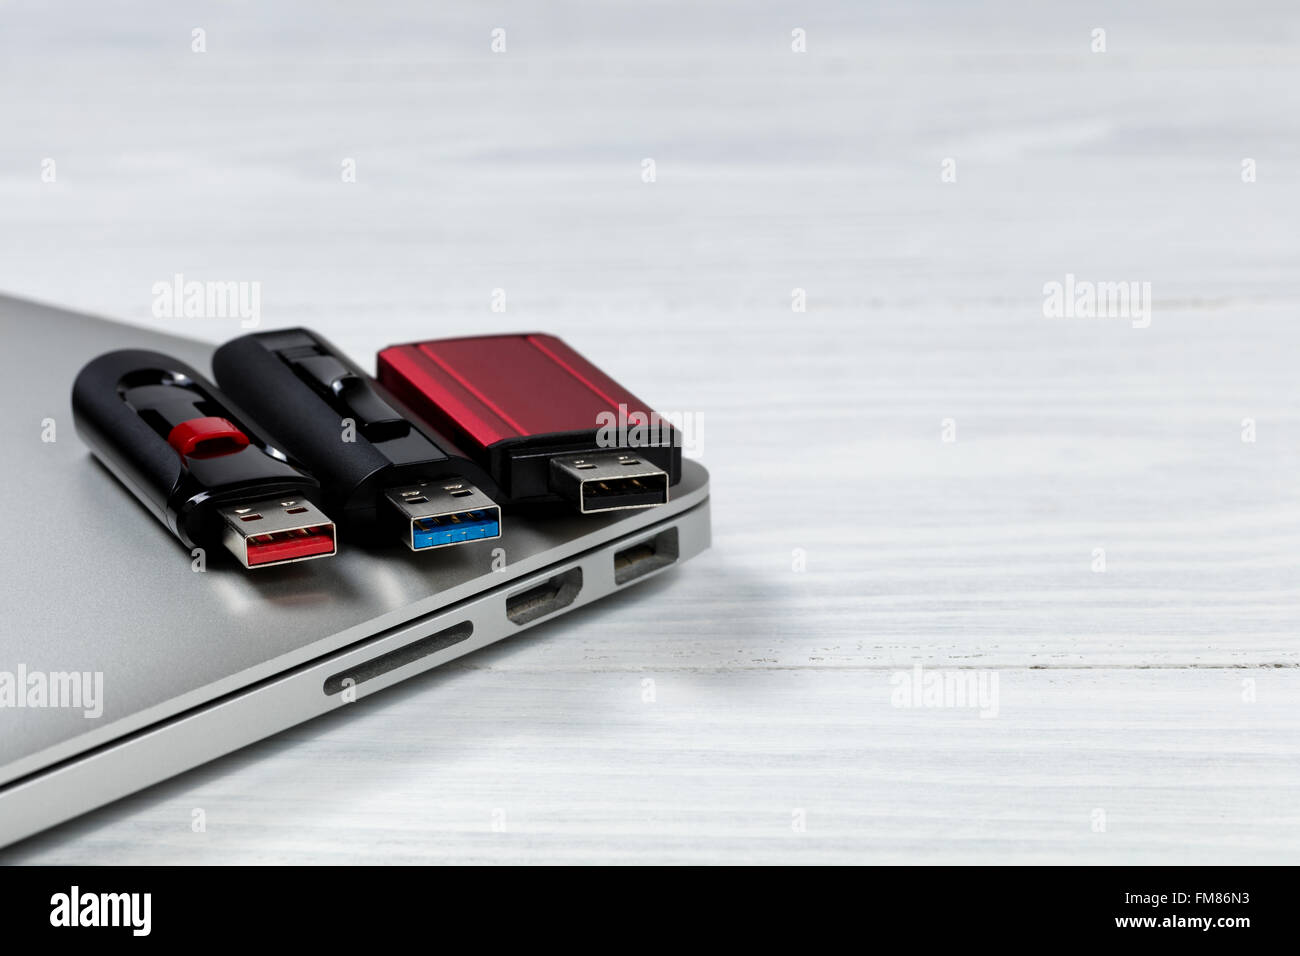 Three thumb drives with different colors inside for USB technologies. Computer and desktop in background. Stock Photo